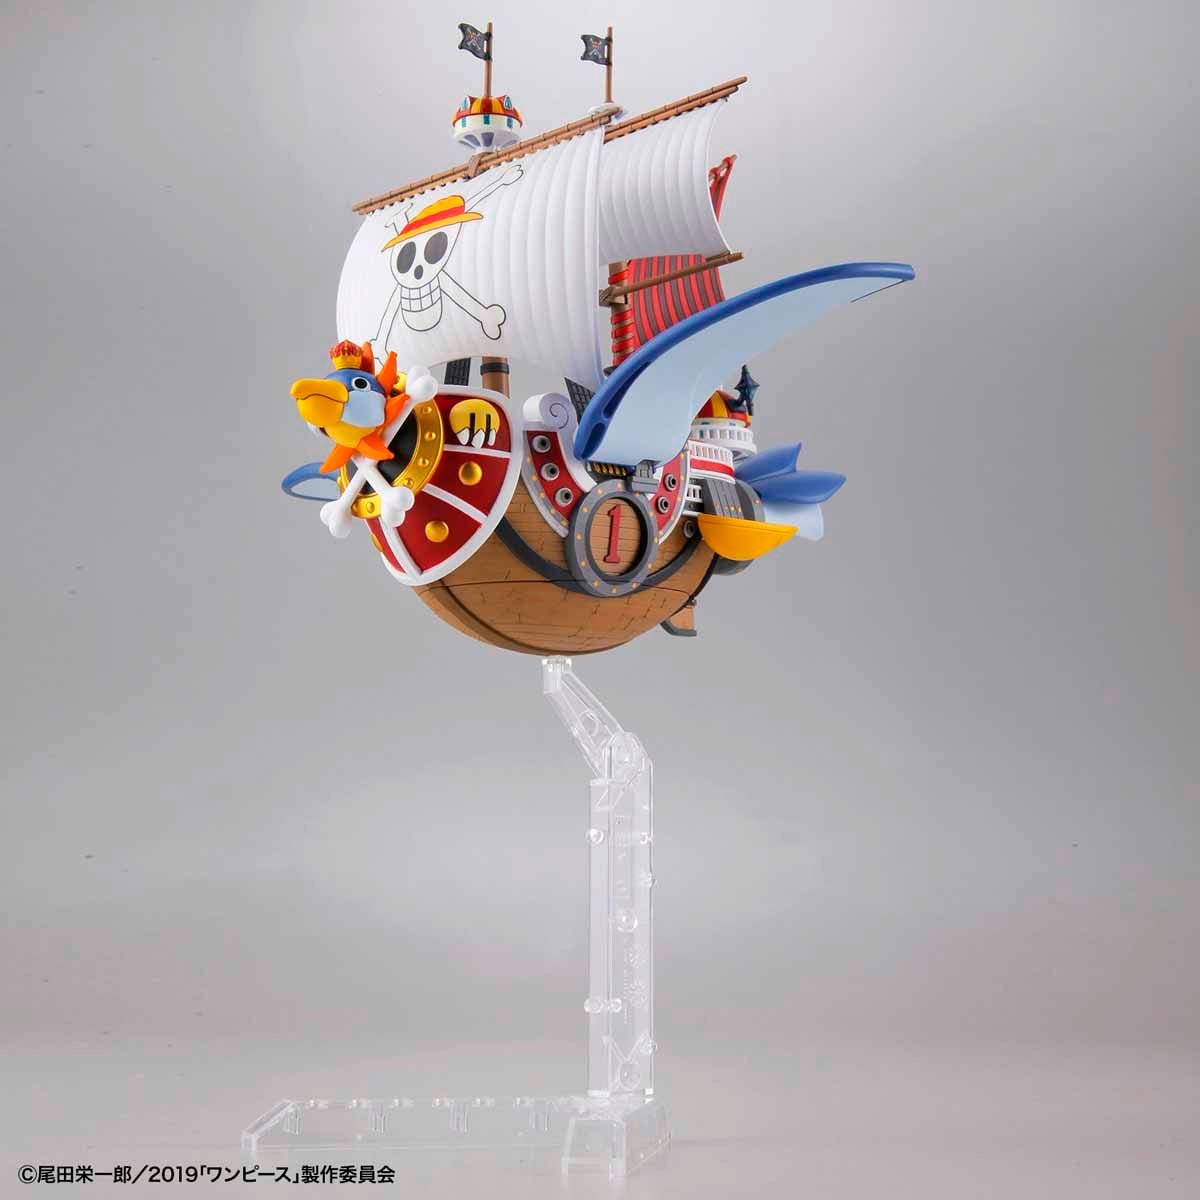 Grand Ship Collection - Thousand-Sunny Flying Model